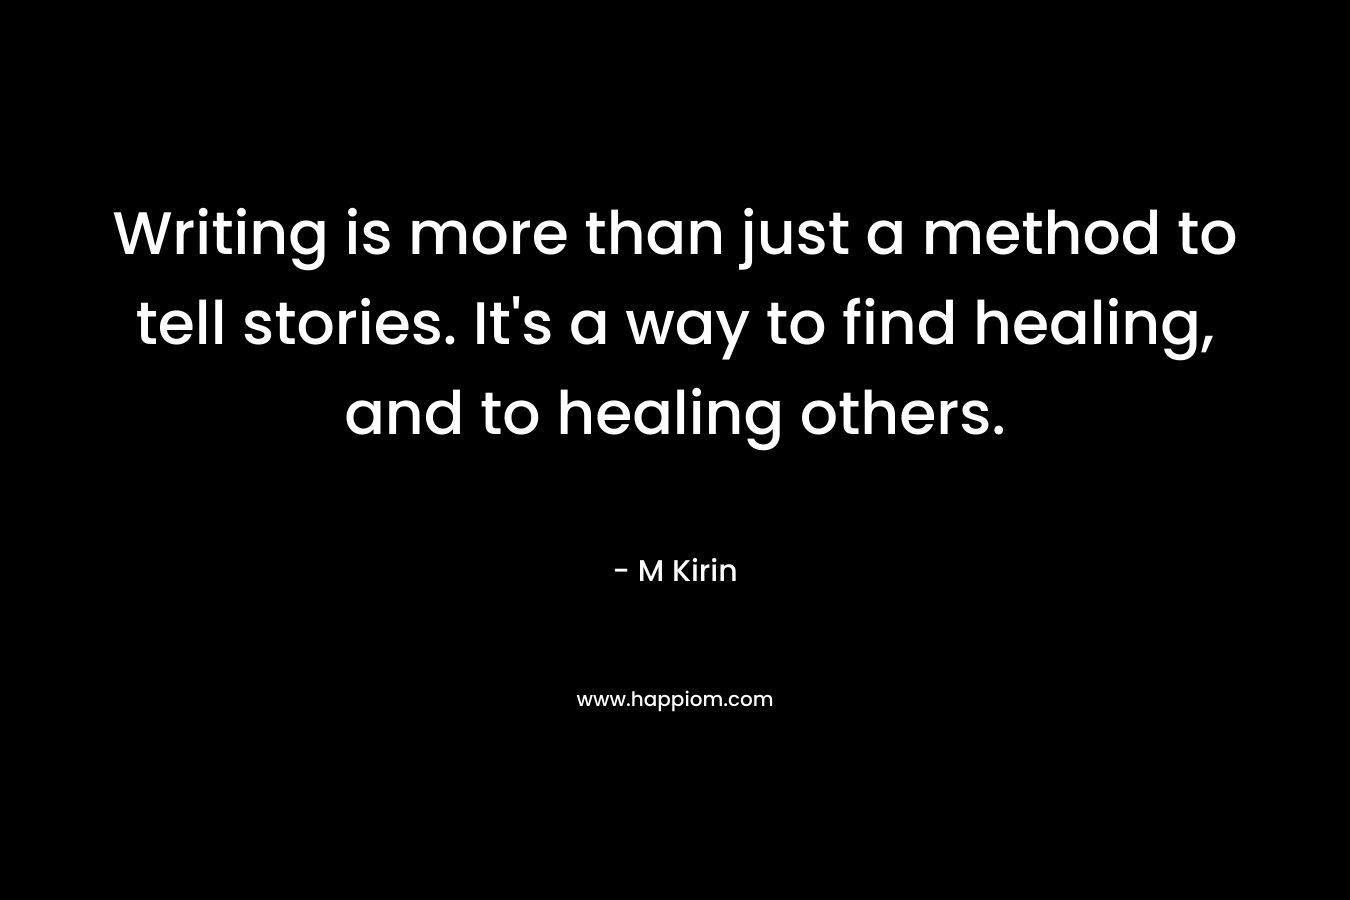 Writing is more than just a method to tell stories. It's a way to find healing, and to healing others.